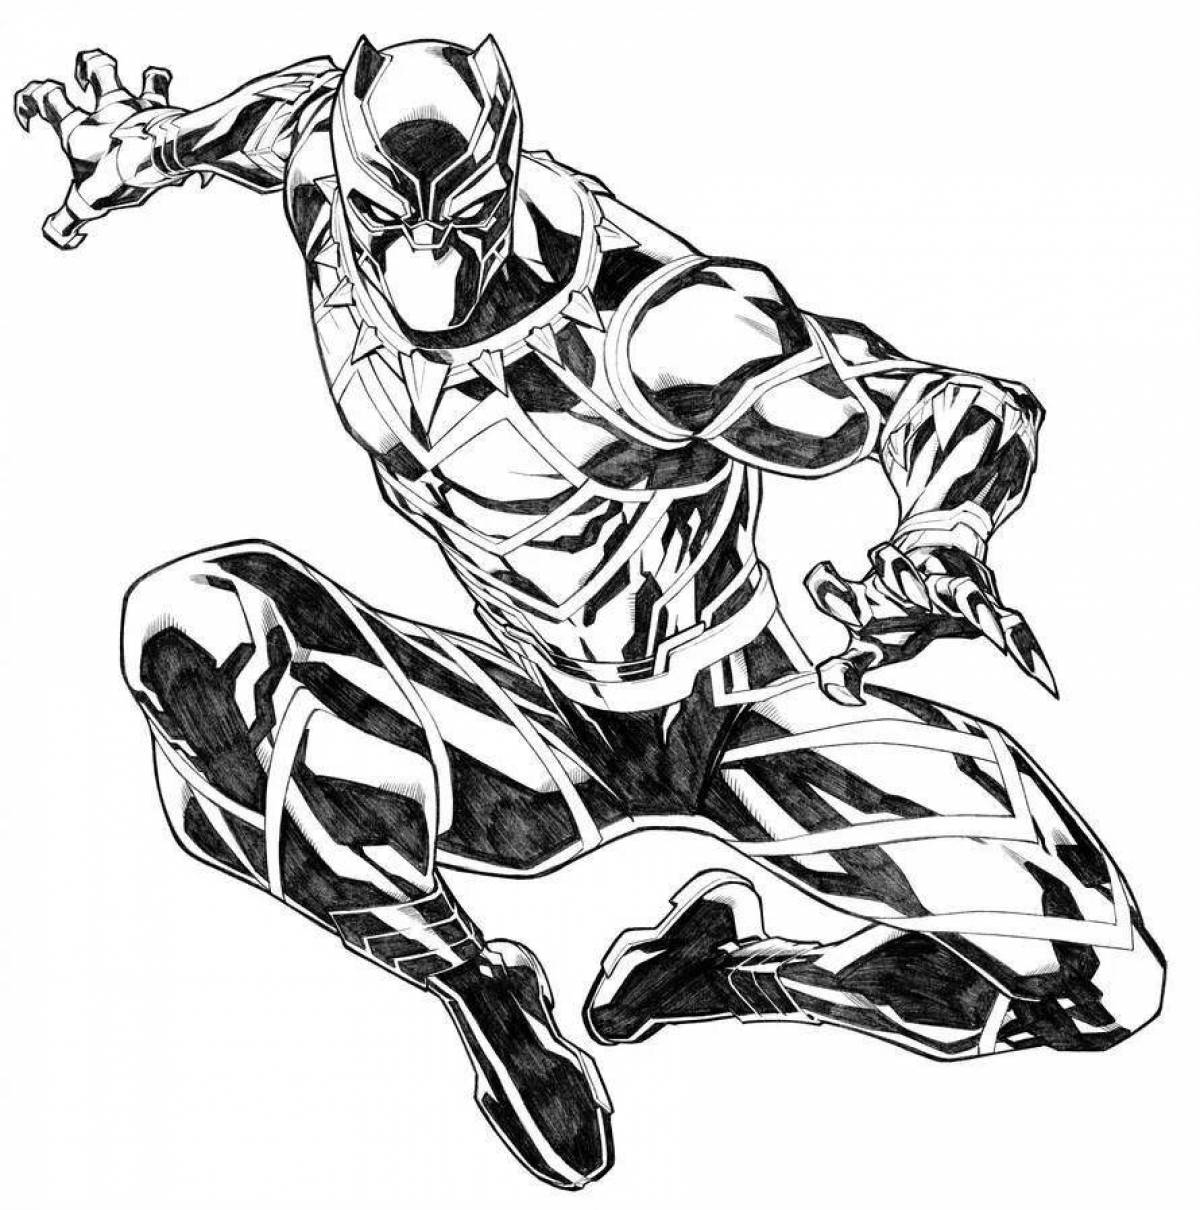 Bright marvel panther coloring page